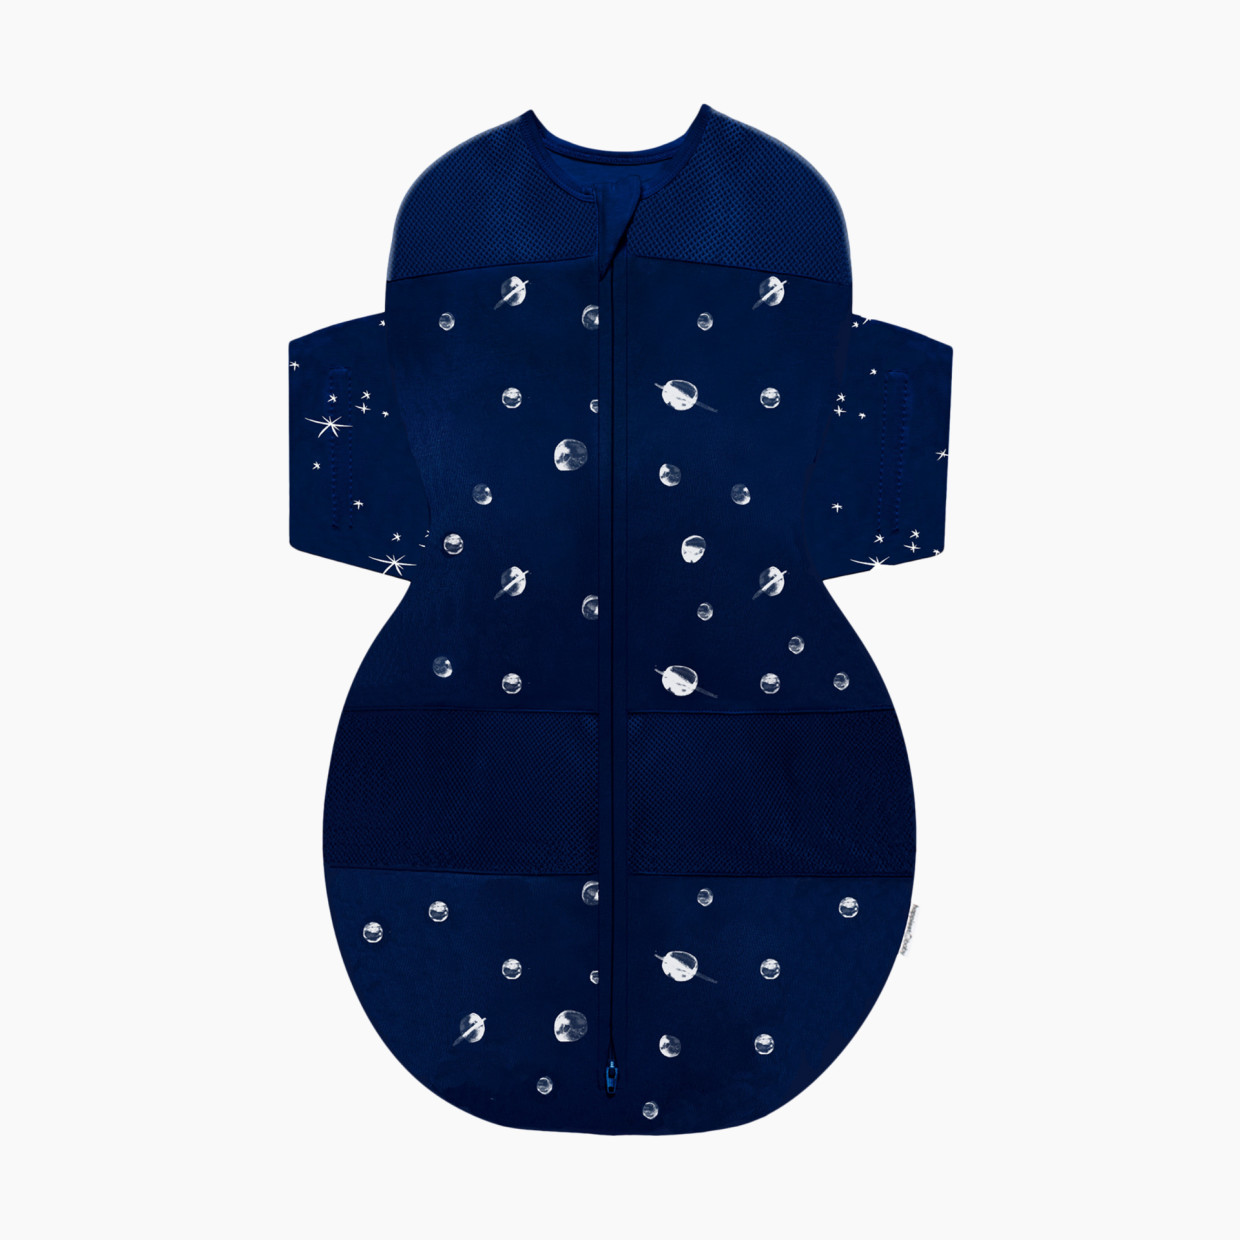 Happiest Baby Snoo Sack - Midnight Planets, Large.